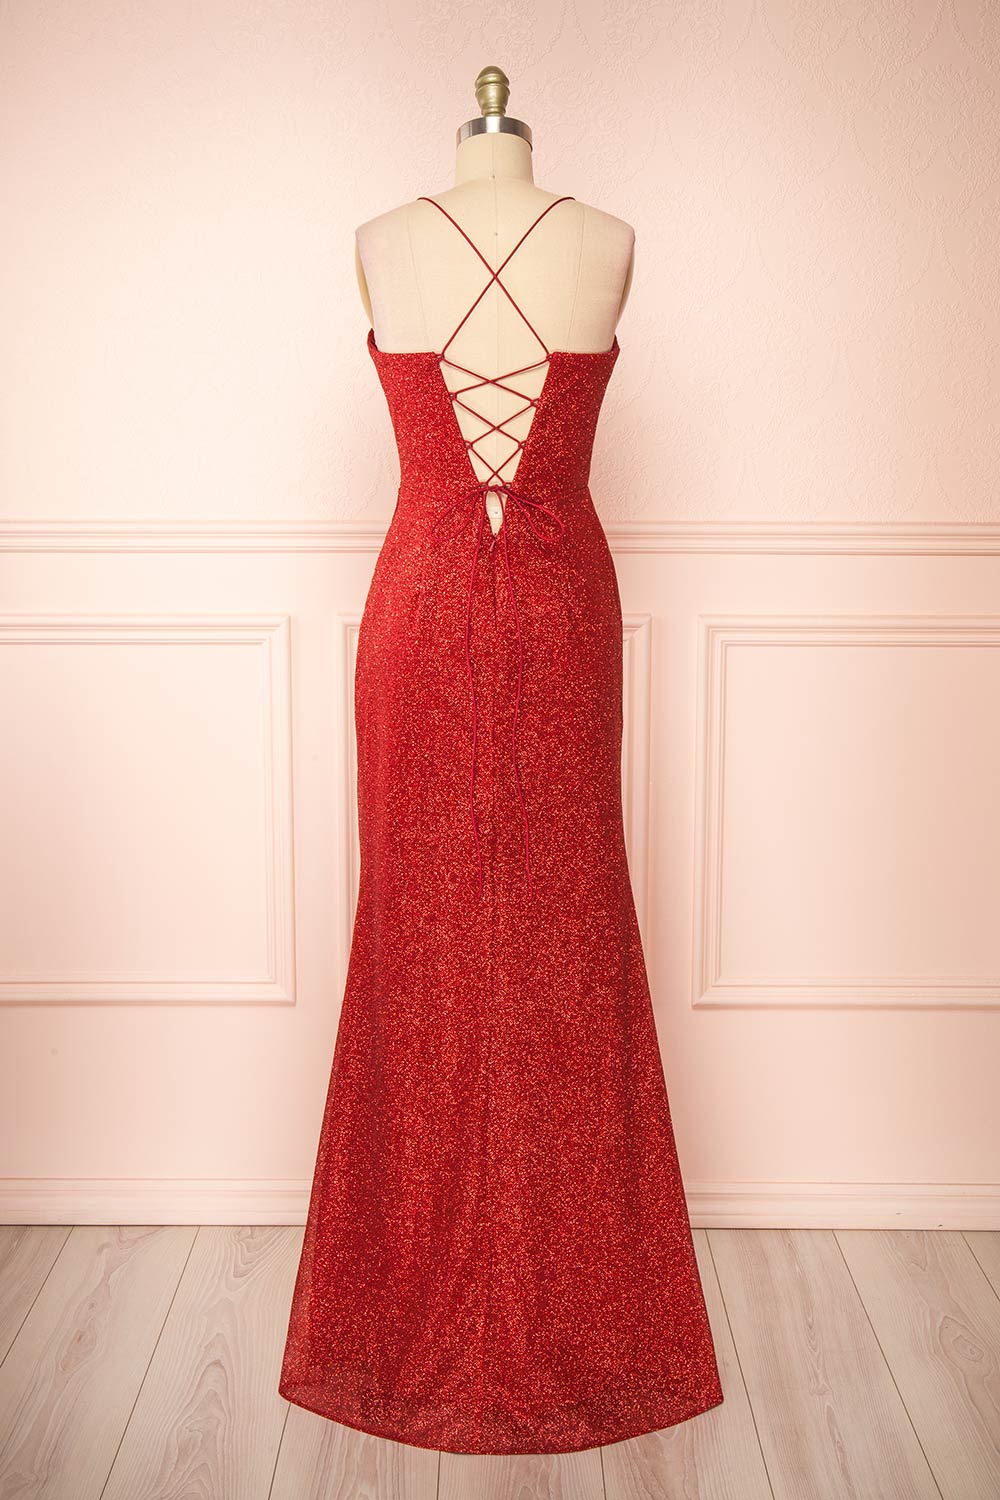 Frosti Red Sparkly Cowl Neck Maxi Dress | Boutique 1861 back view 